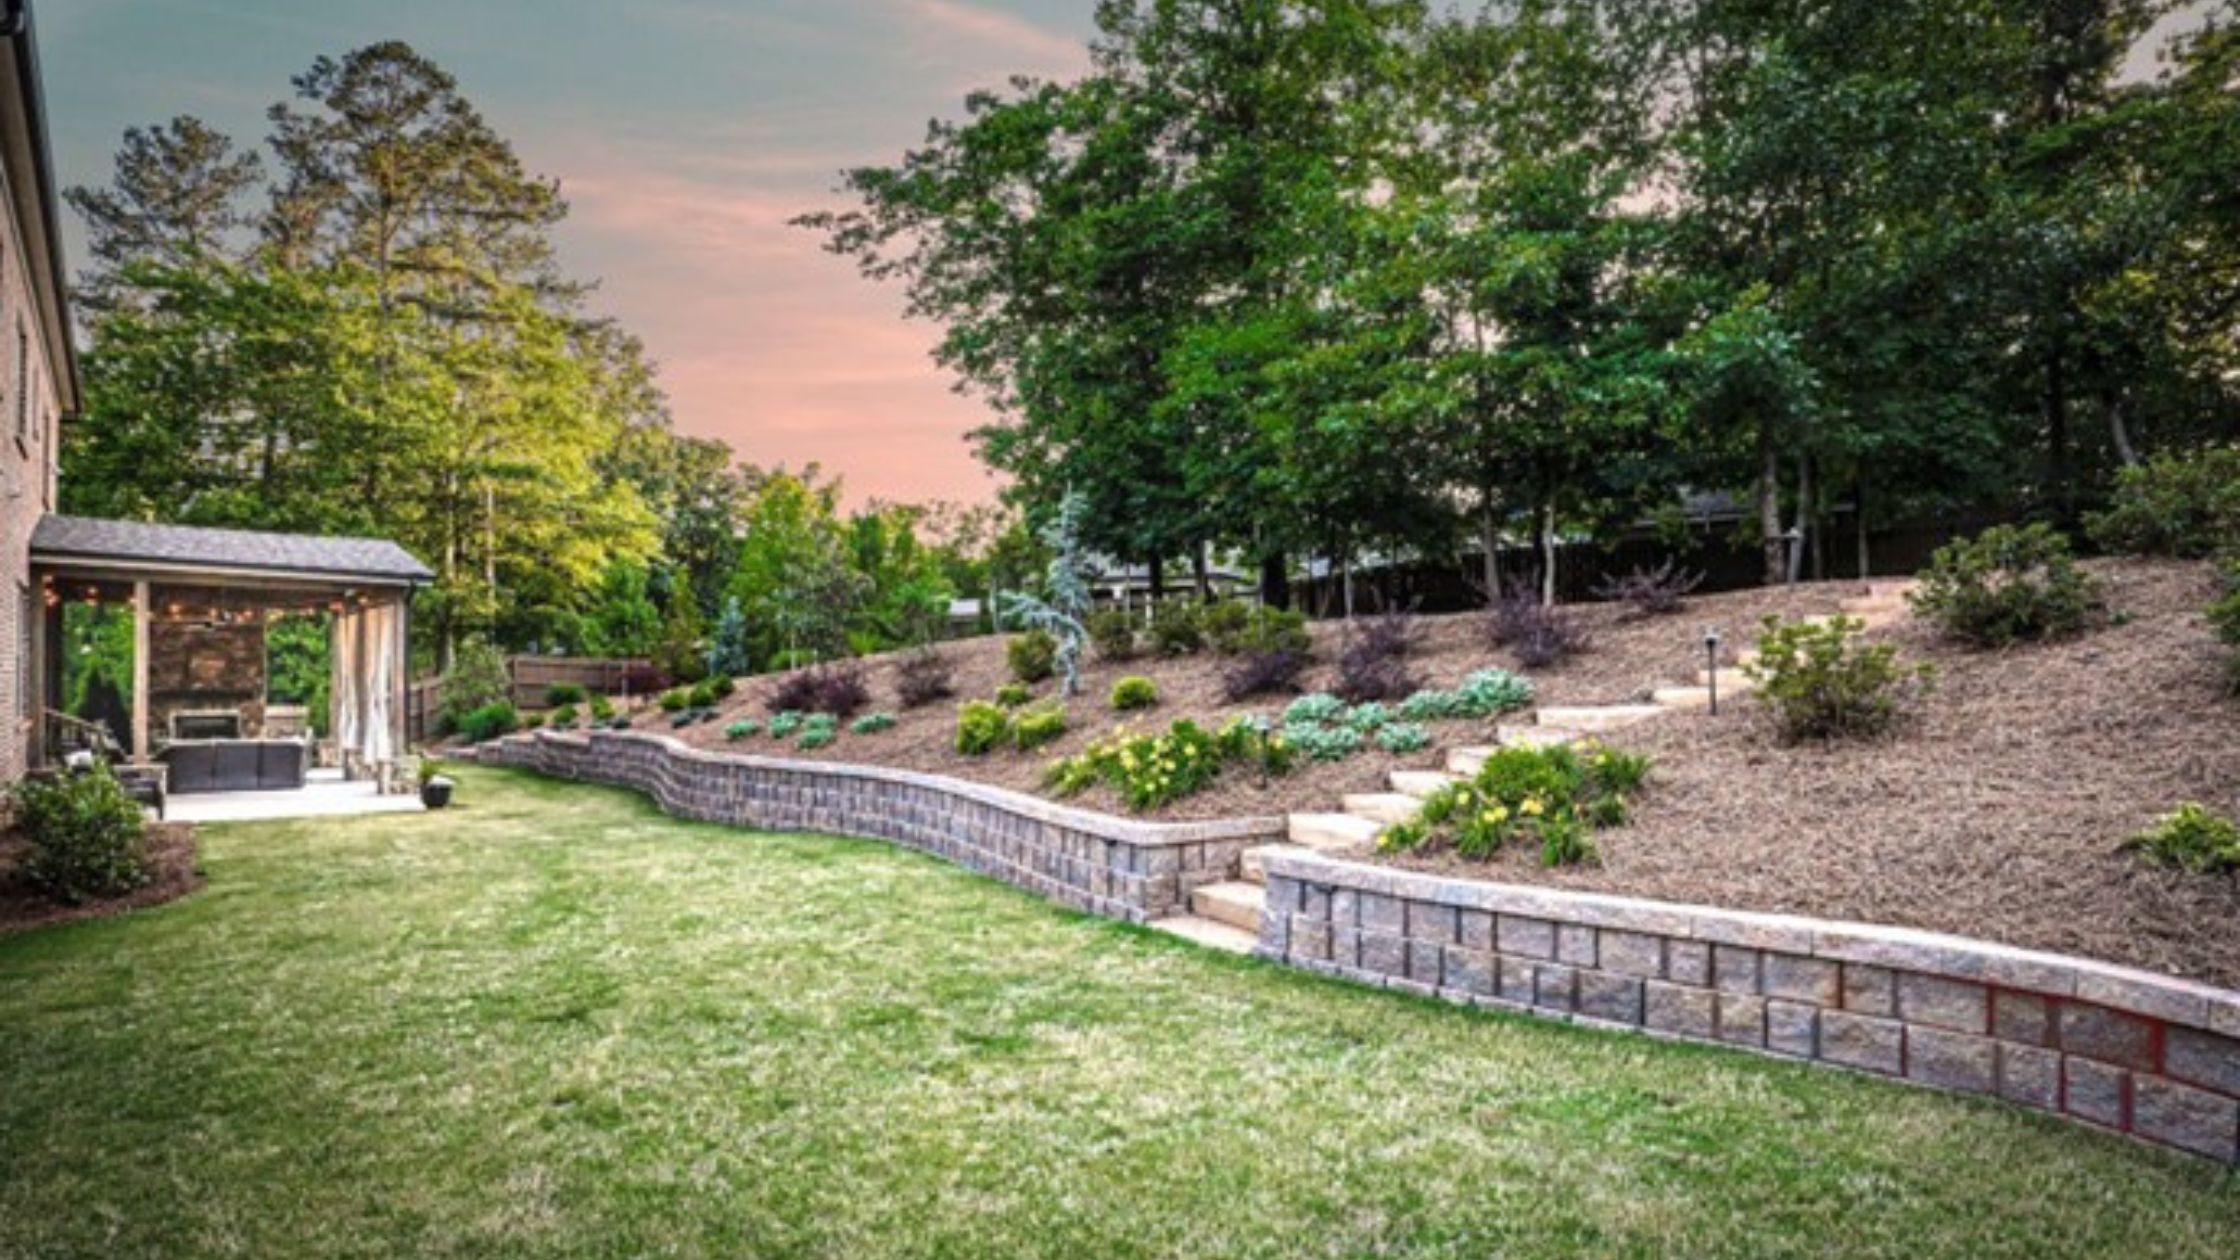 The Top 10 Hardscape Trends & Ideas for a Sustainable and Stylish Landscape